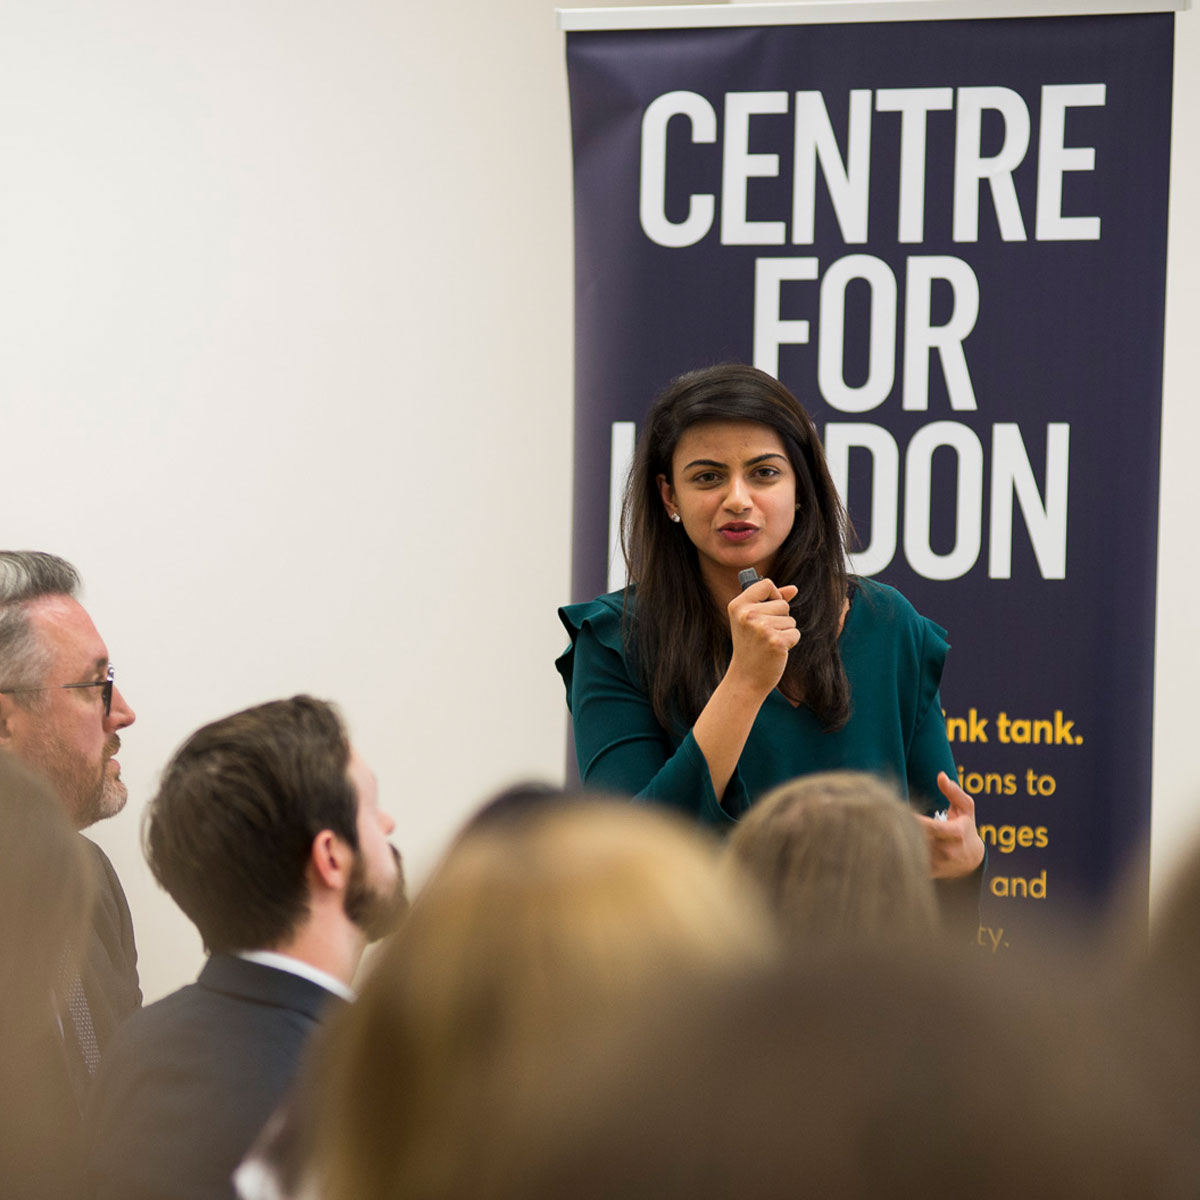 Photo of Arya speaking at an event